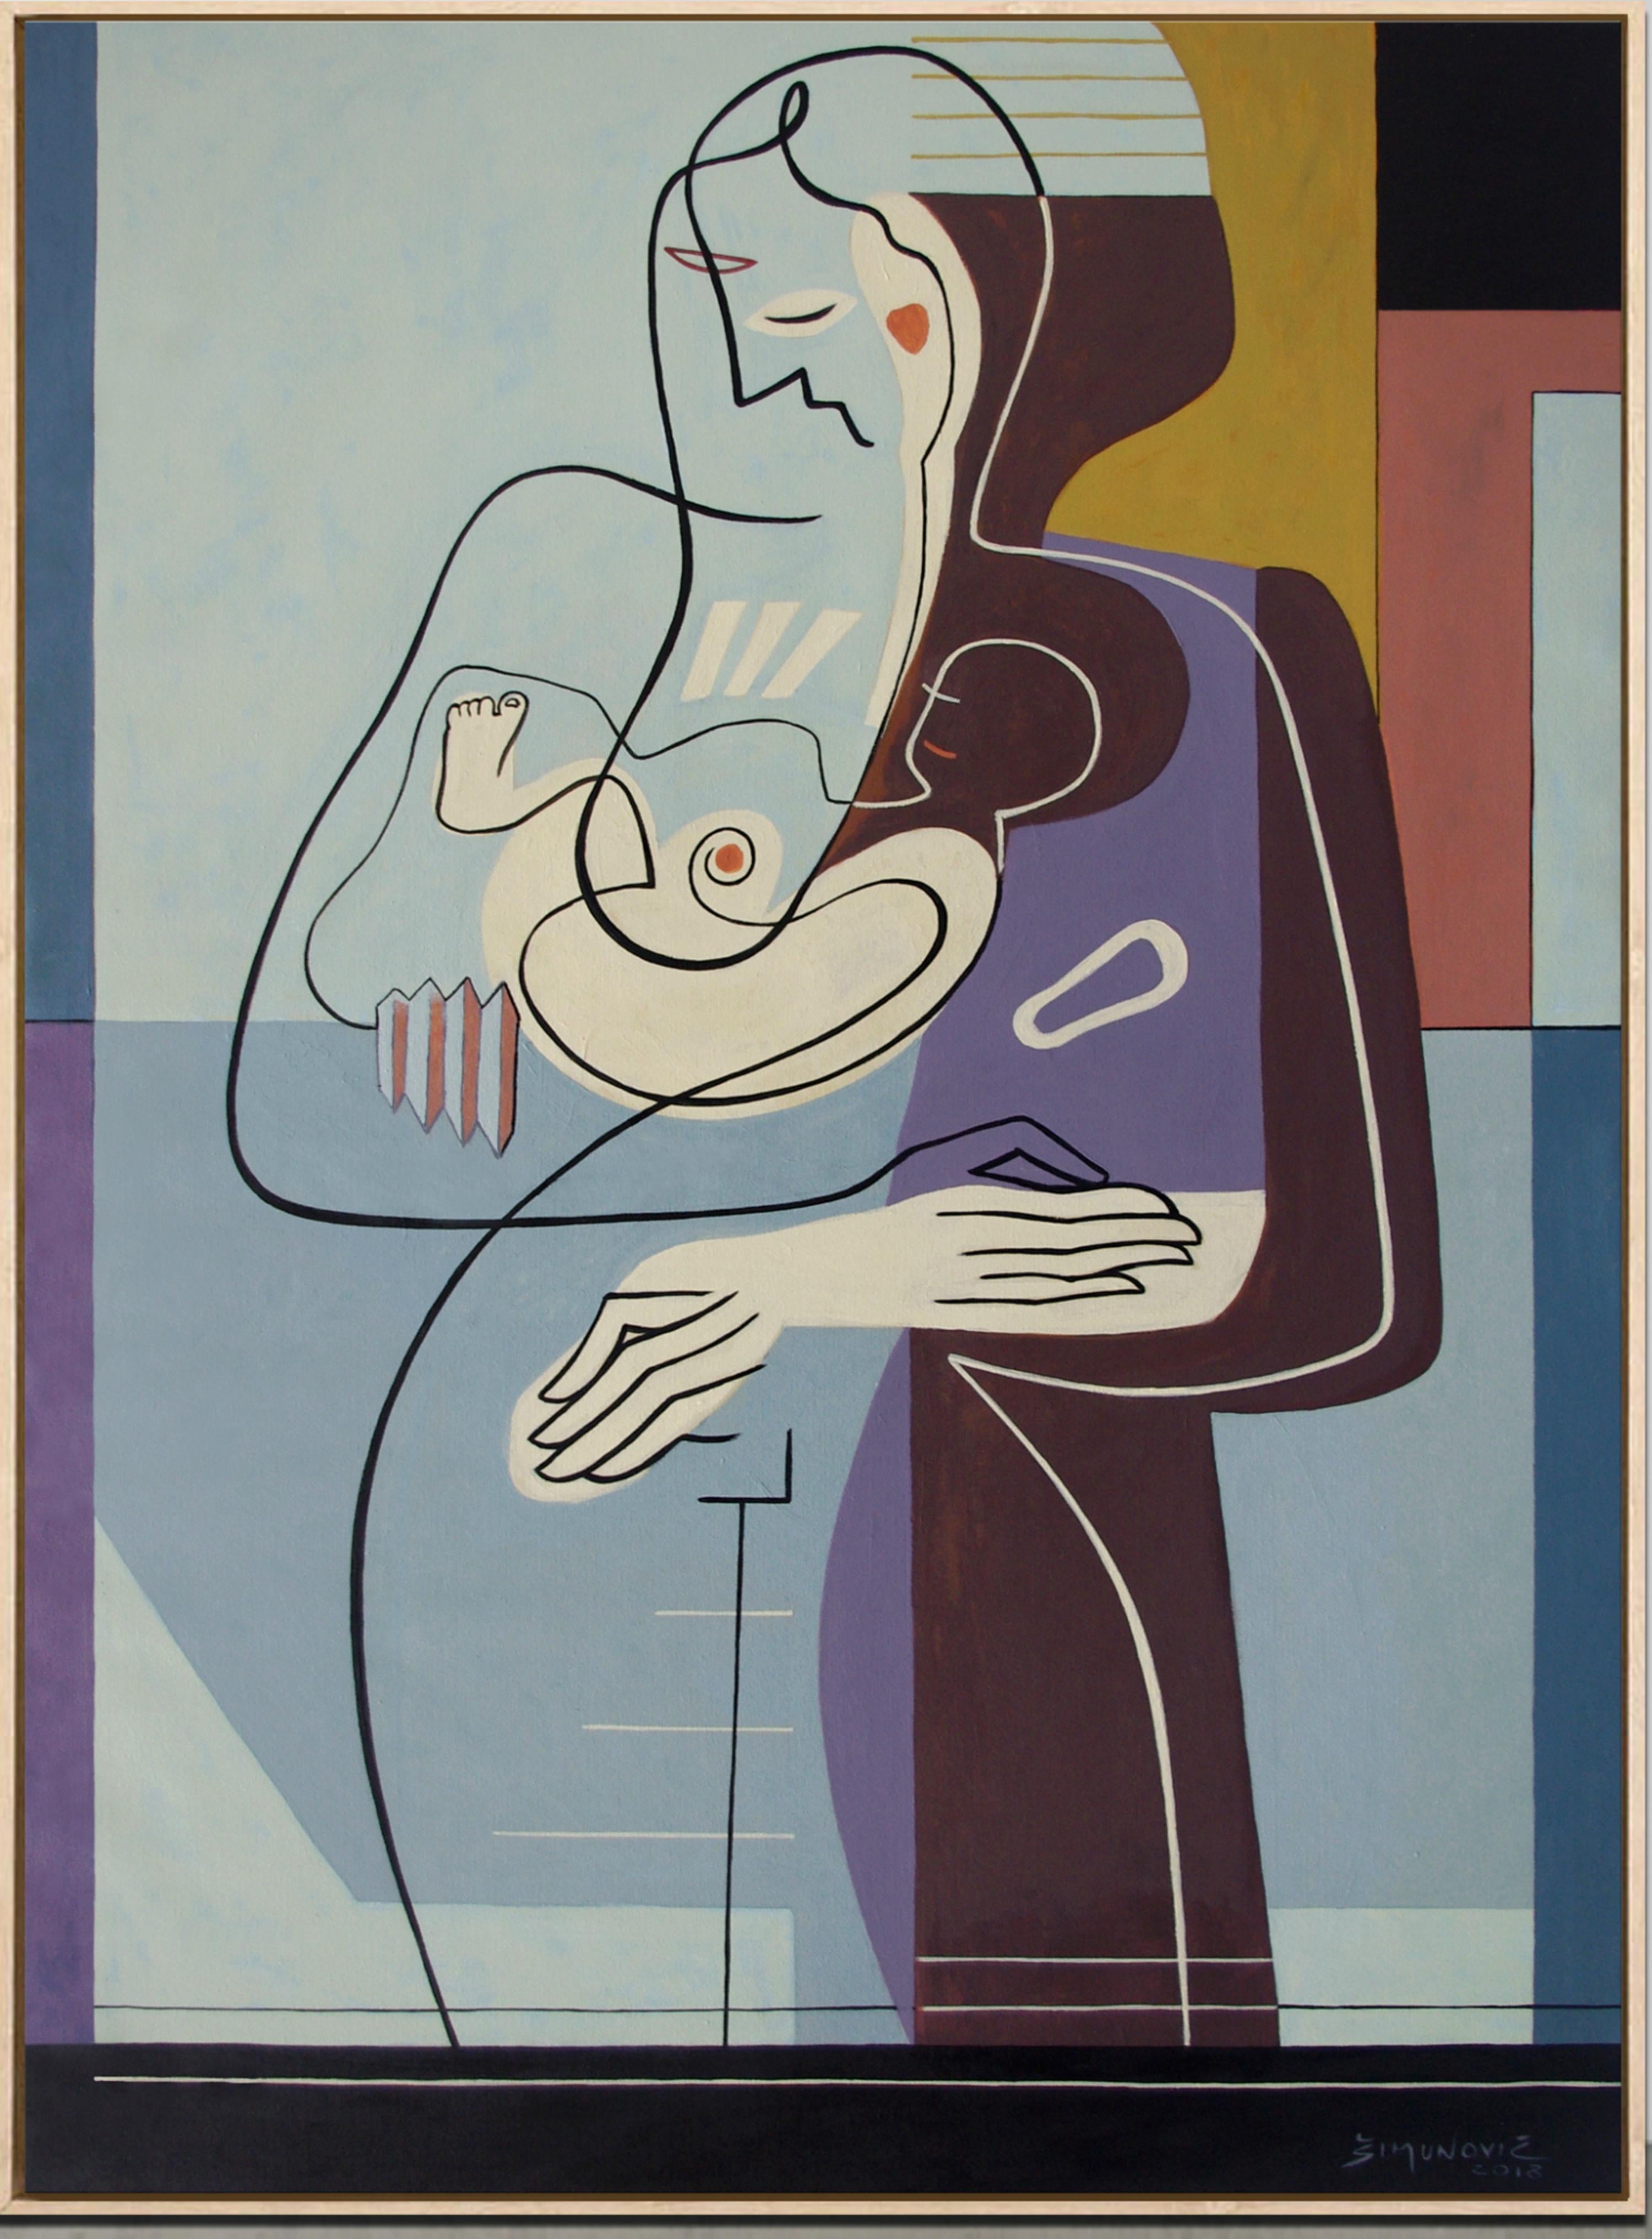 'Circle of Life' by Bernard Simunovic - an intimate abstract portrait of a woman holding a baby. The name of the painting gives this artwork a philosophical spin. The colorful geometric pattern and soft lines outlining a silhouette of a figure make